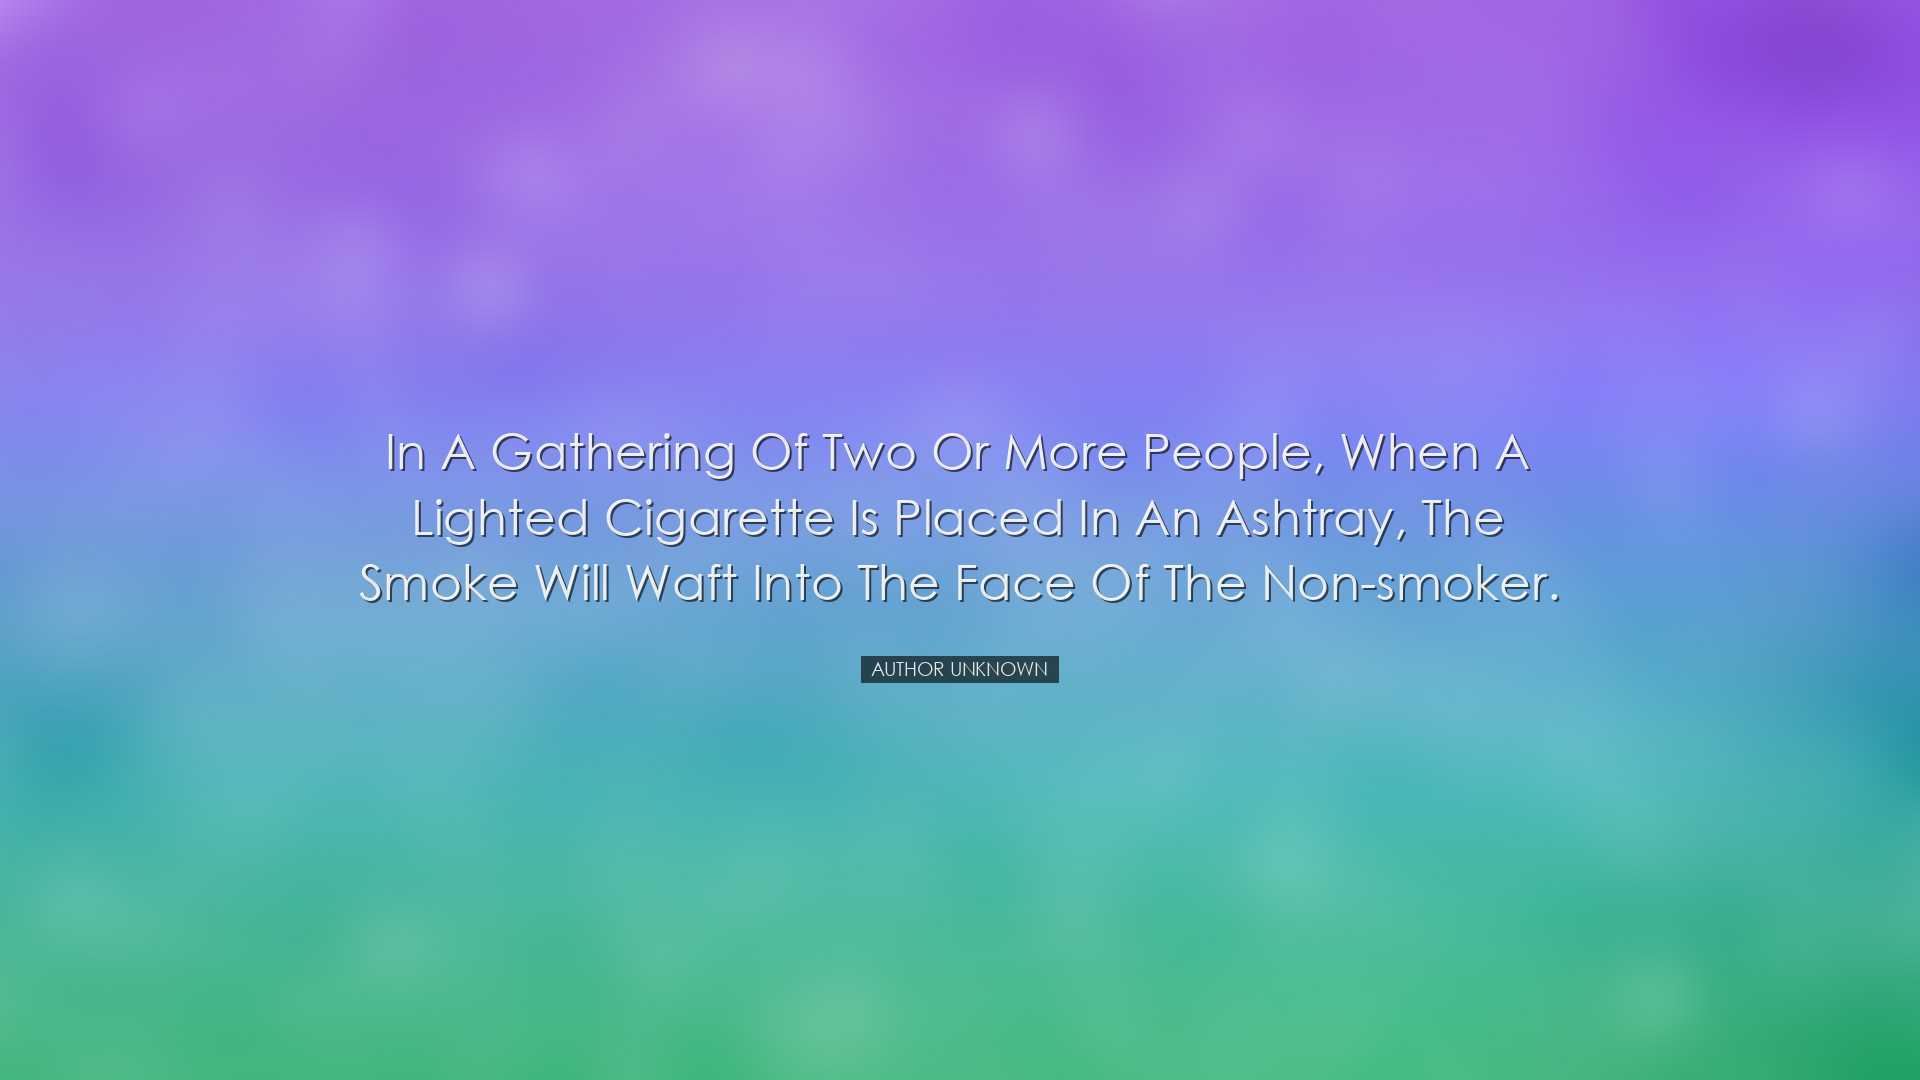 In a gathering of two or more people, when a lighted cigarette is